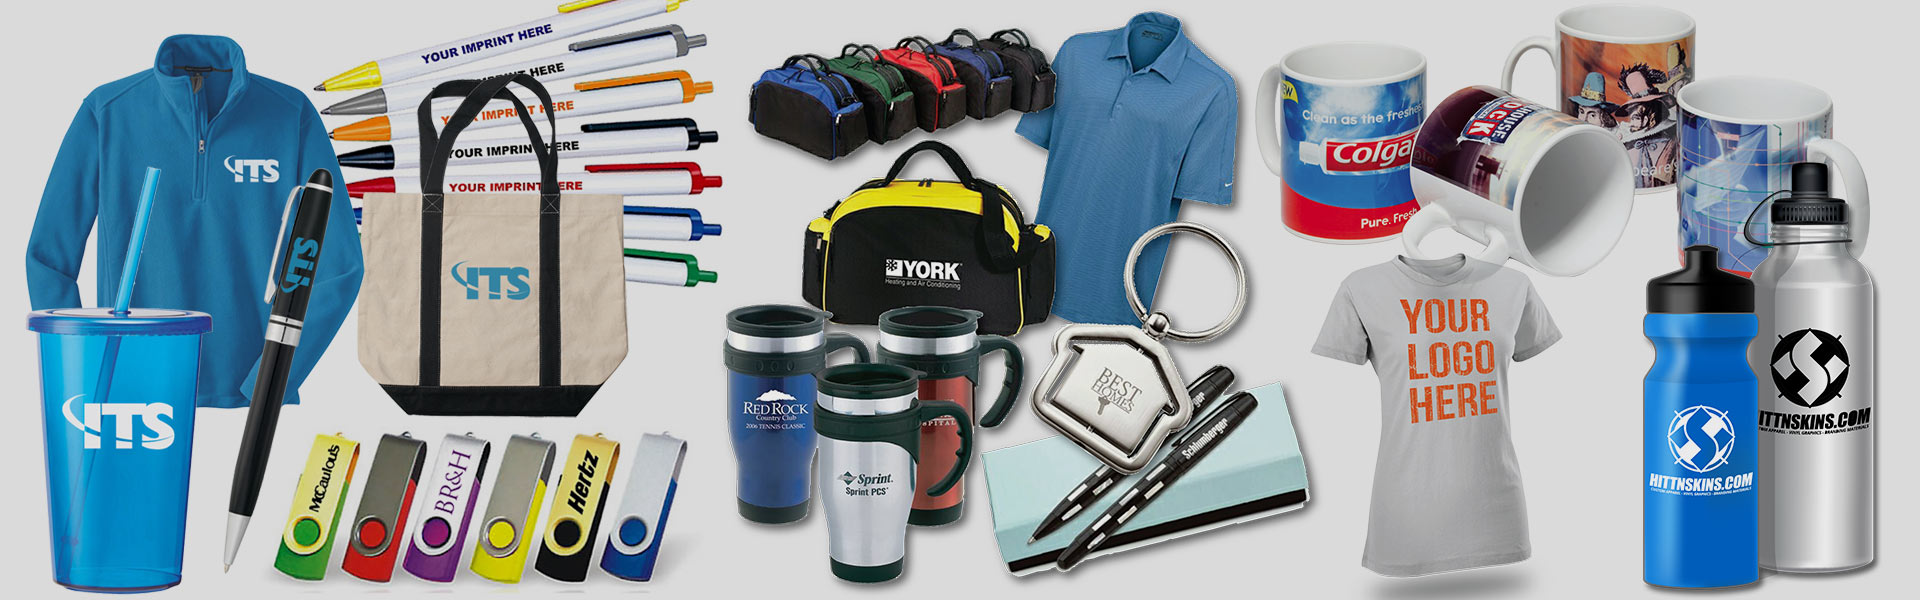 Promotional Products - AD WEAR, INC.